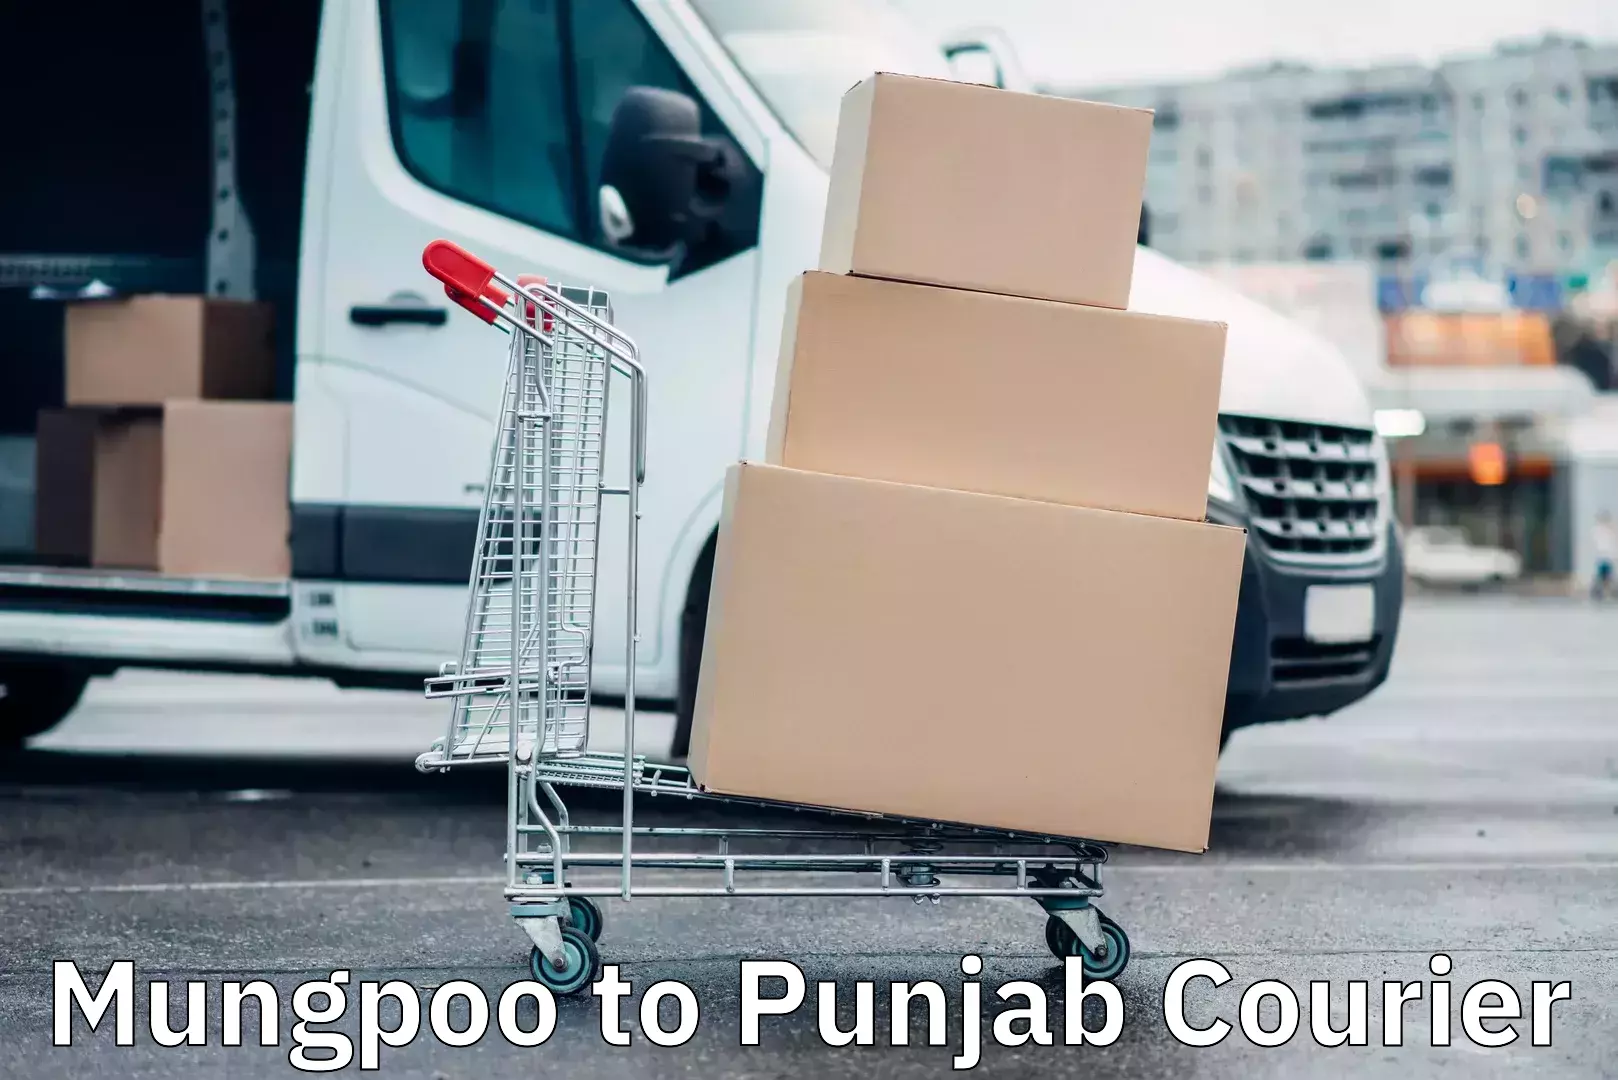 Cash on delivery service Mungpoo to Punjab